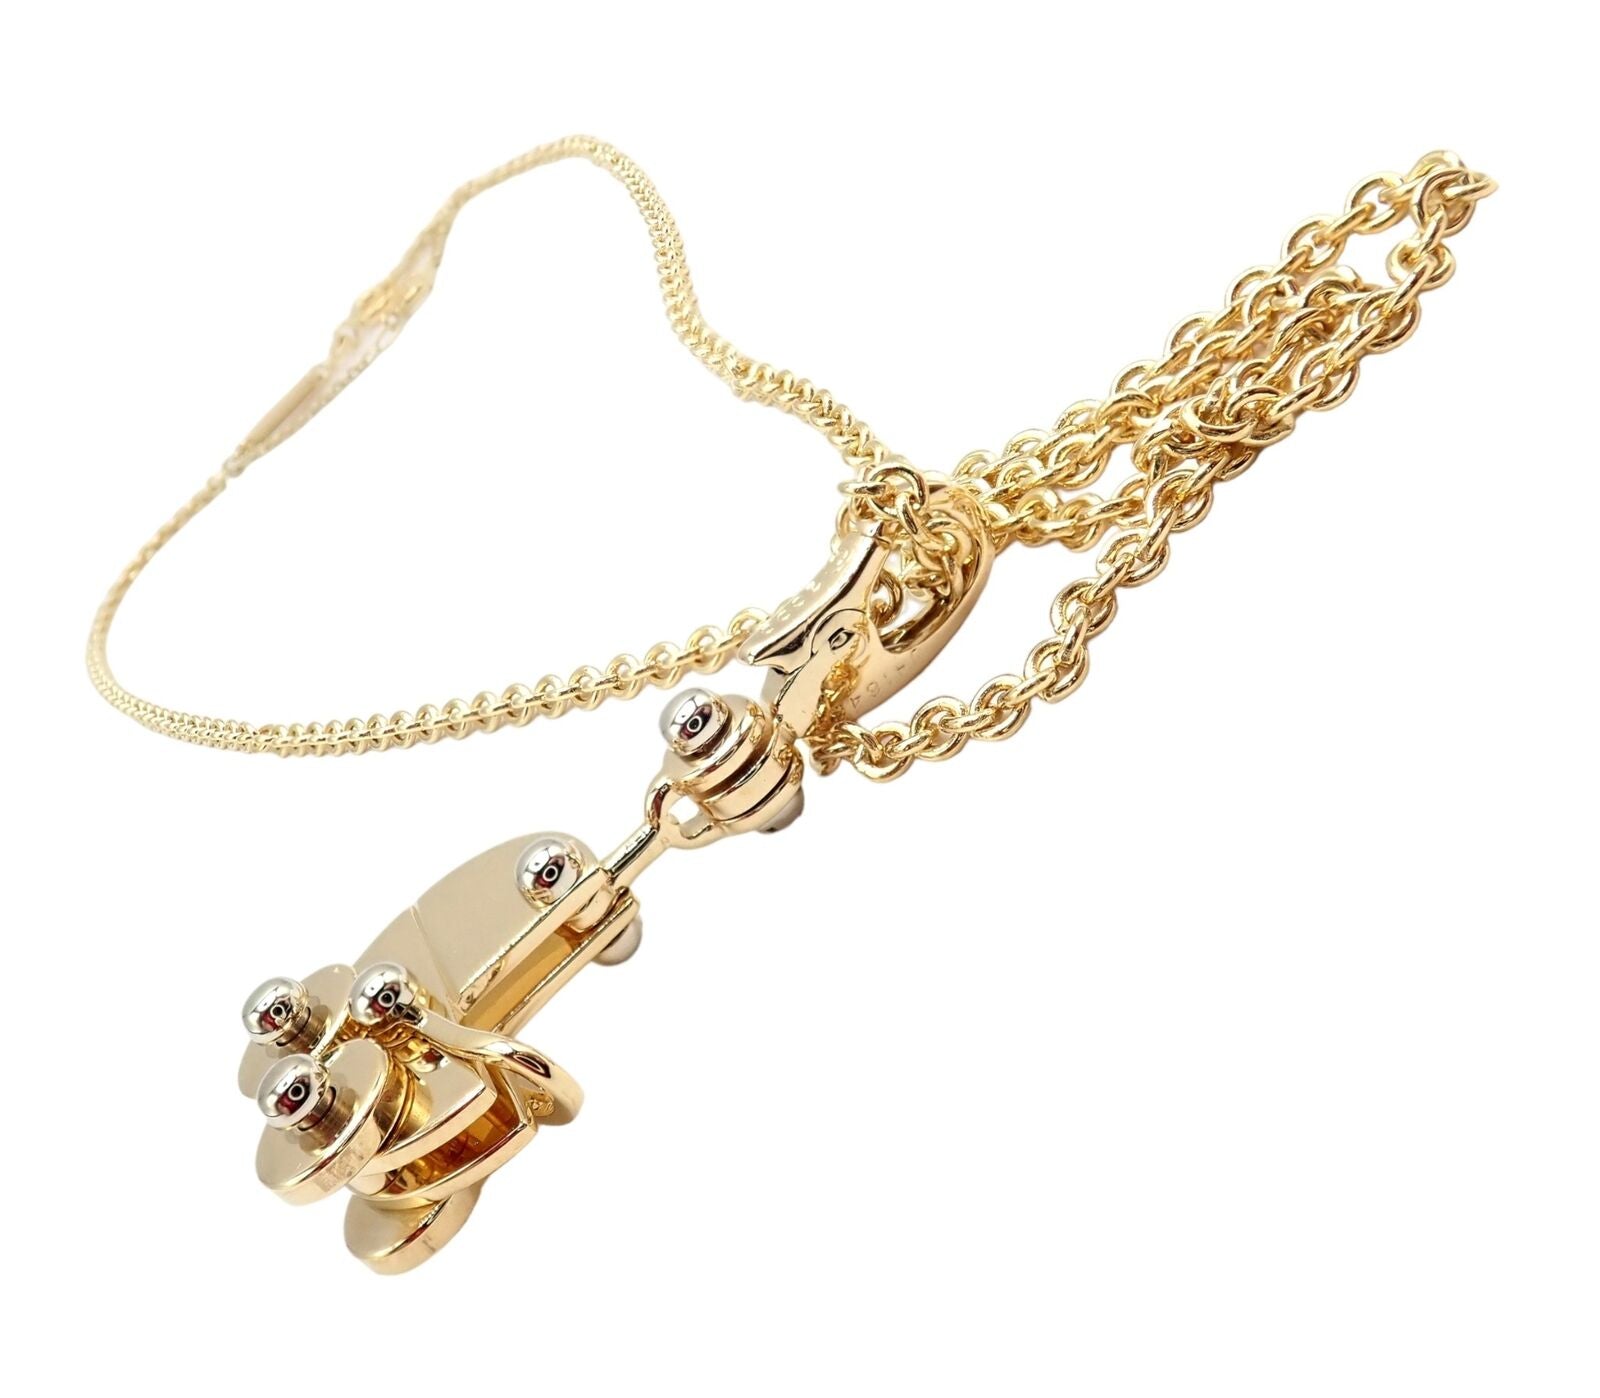 Cartier Jewelry & Watches:Fine Jewelry:Necklaces & Pendants Authentic! Cartier 18k Yellow Gold Baby Carriage Stroller Charm Pendant Necklace